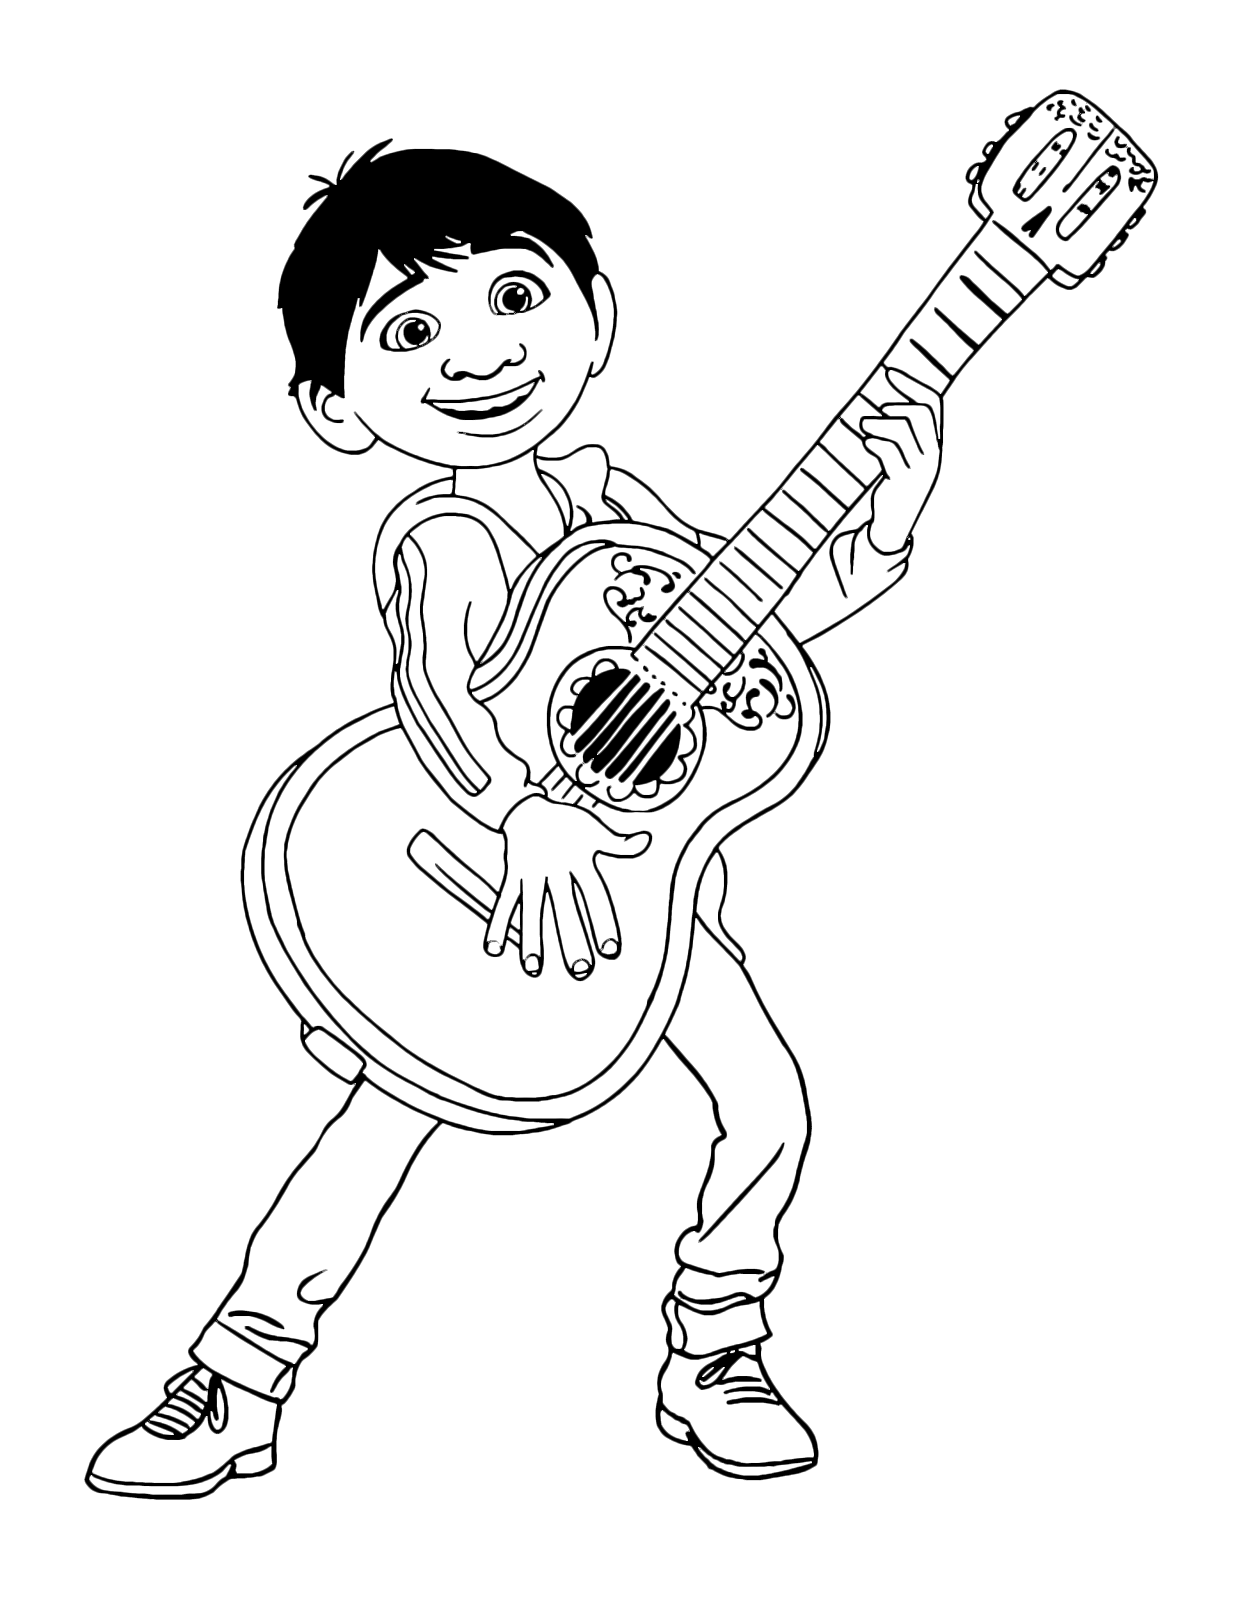 Coco Miguel on Guitar colouring image